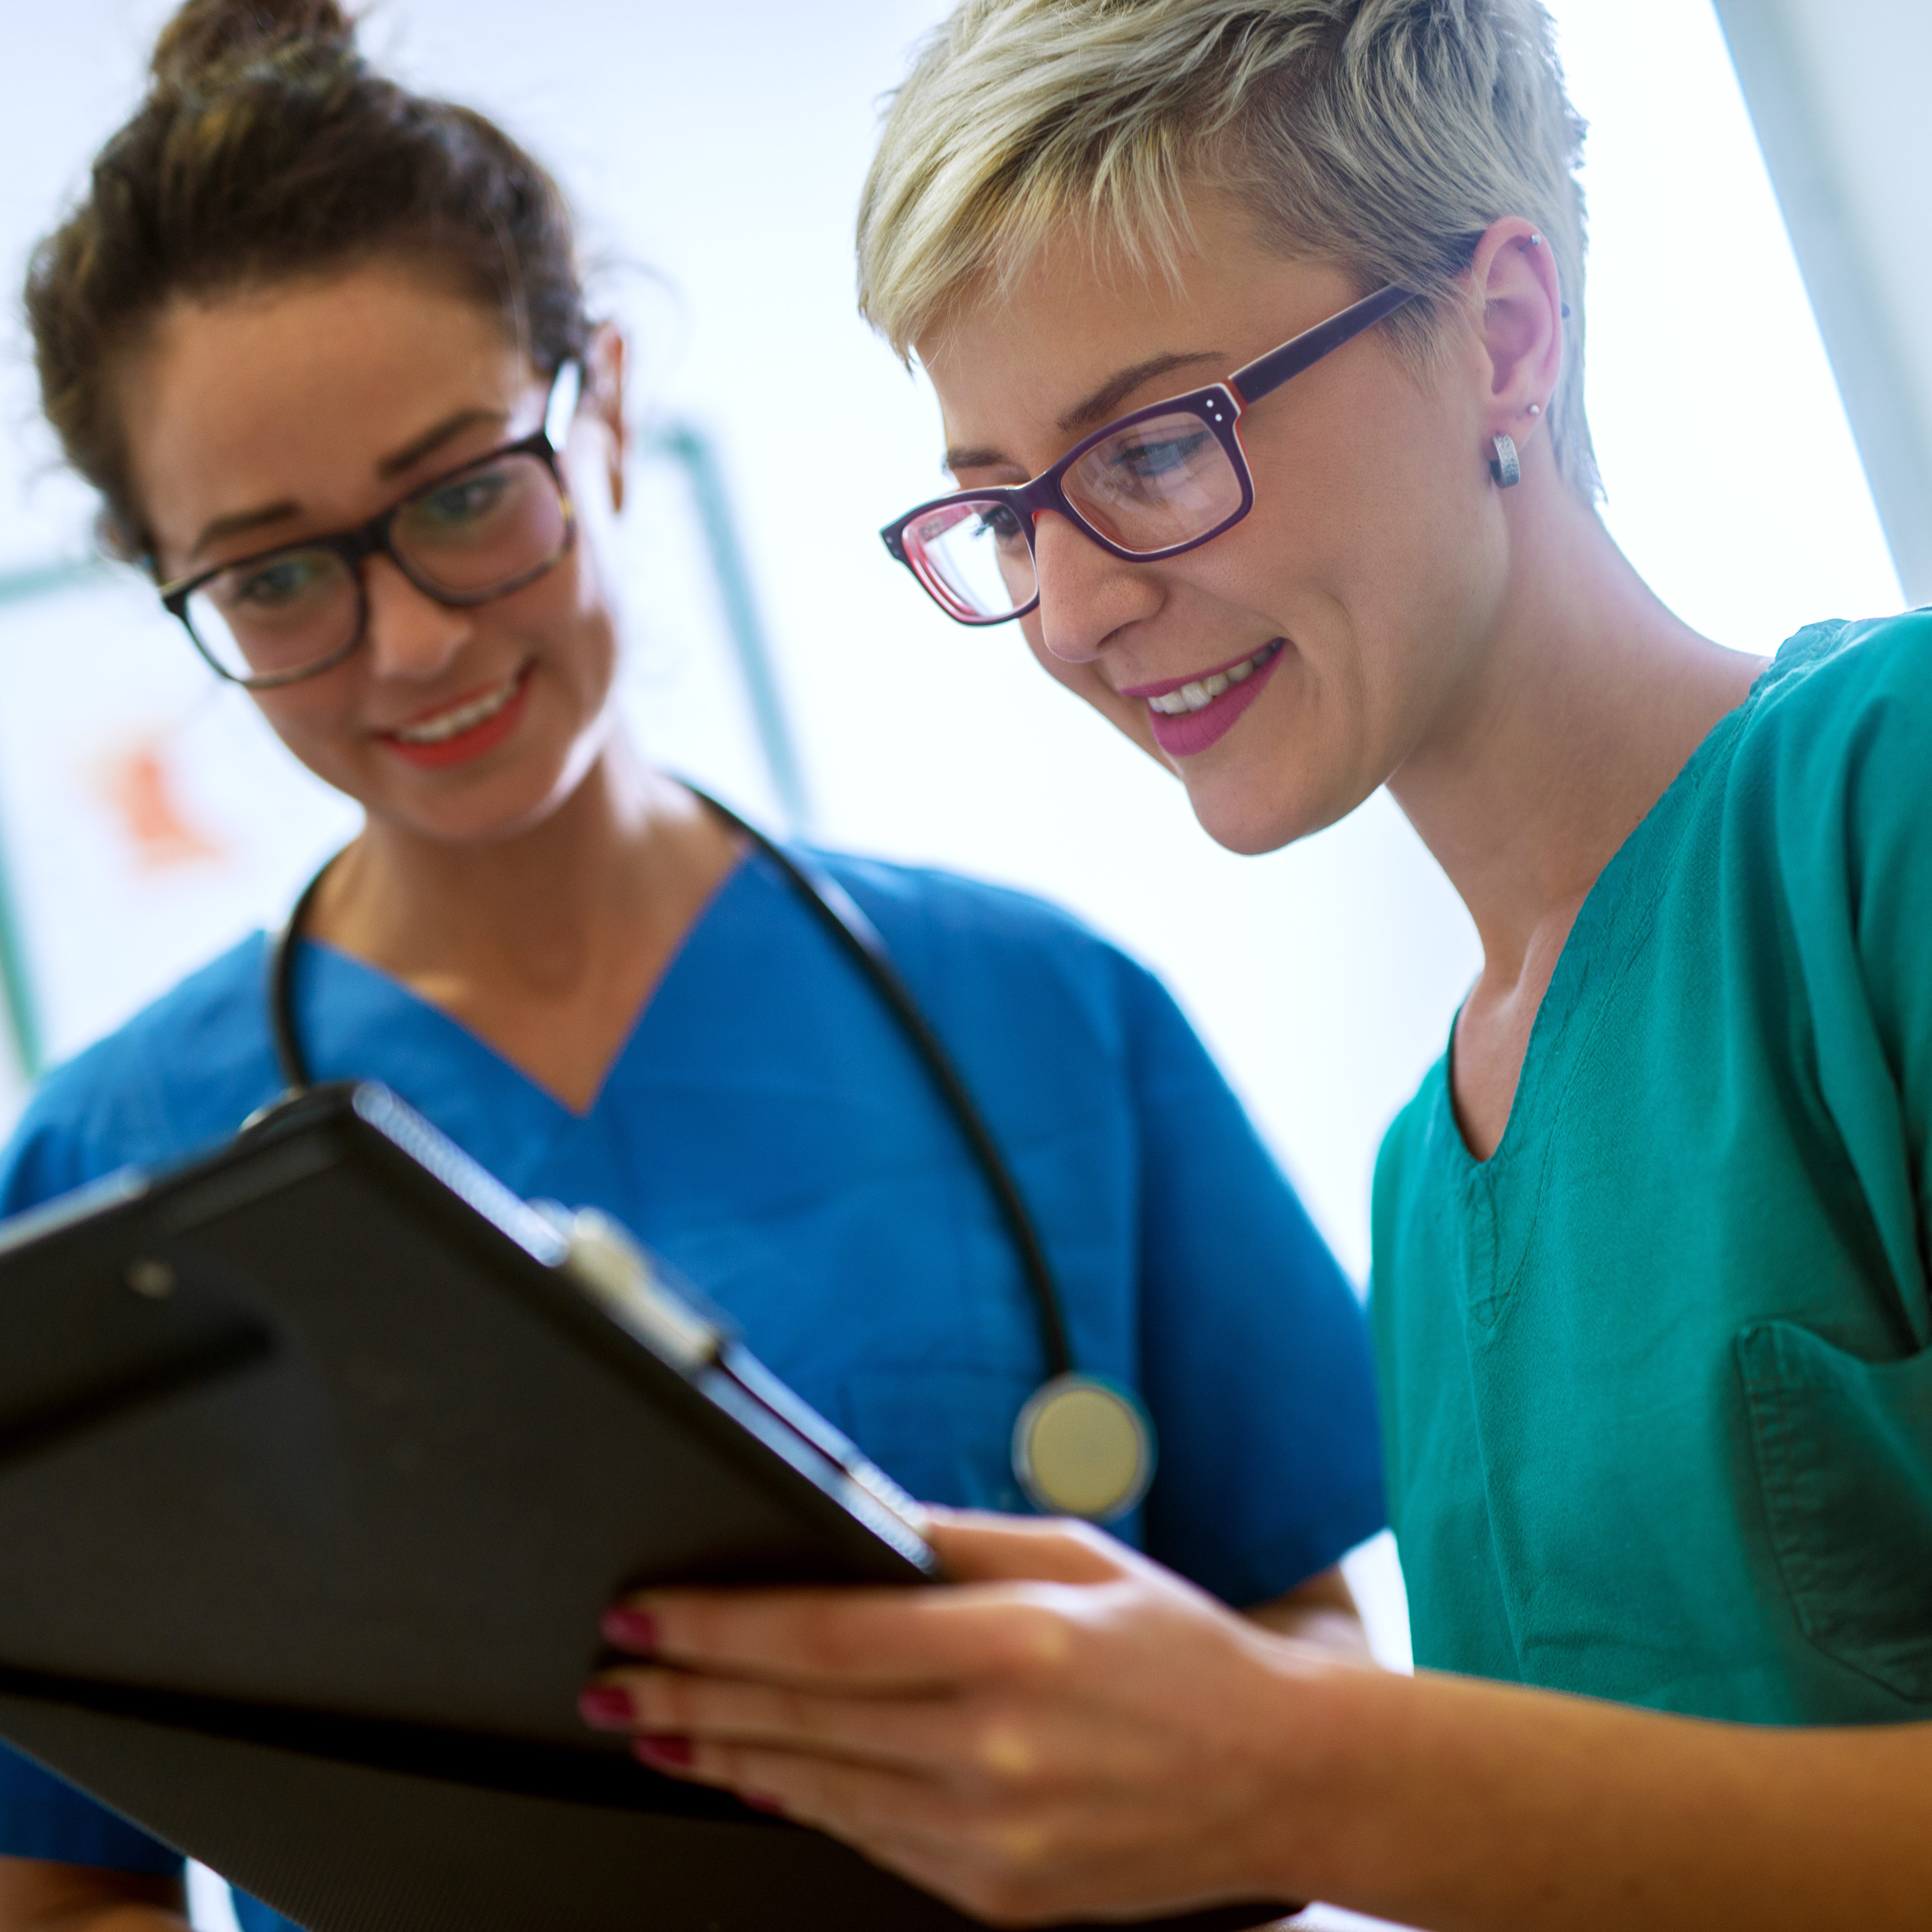 Close up view of two professional nurses with eyeglasses checking the patient papers in a doctors office.